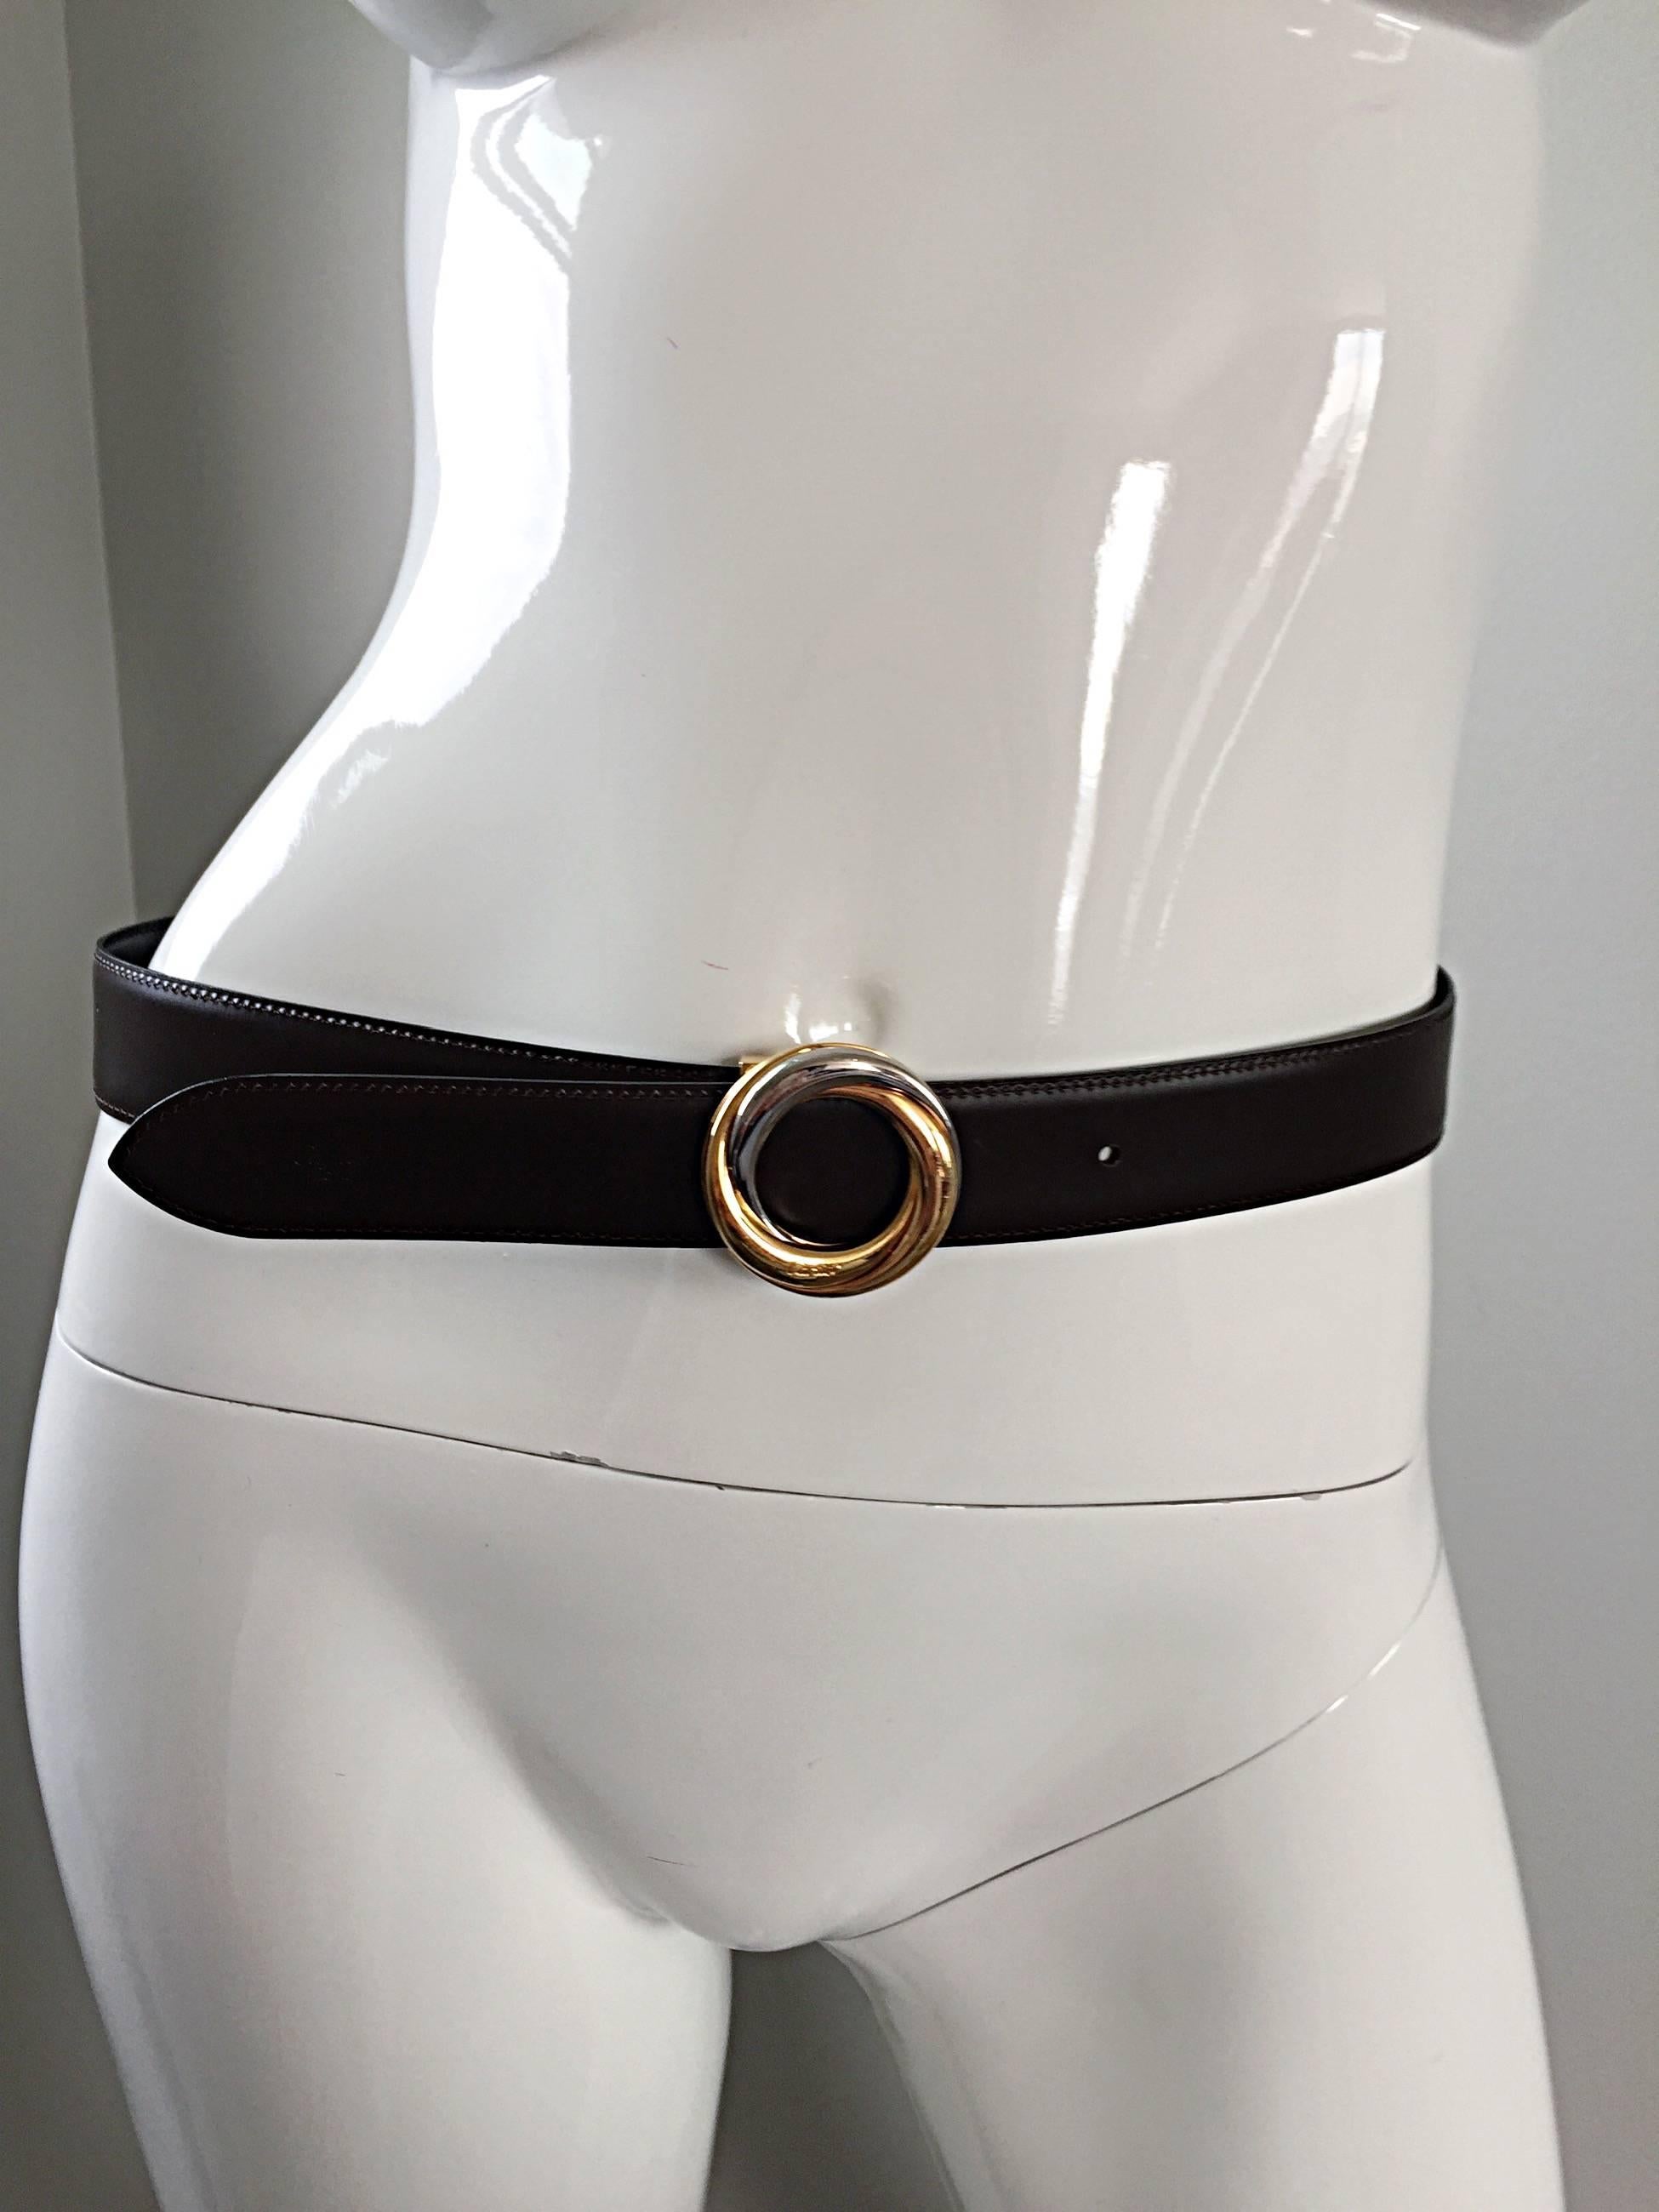 New Cartier Unisex Reversible Belt Brown + Black Two - Tone Gold & Silver Buckle 3